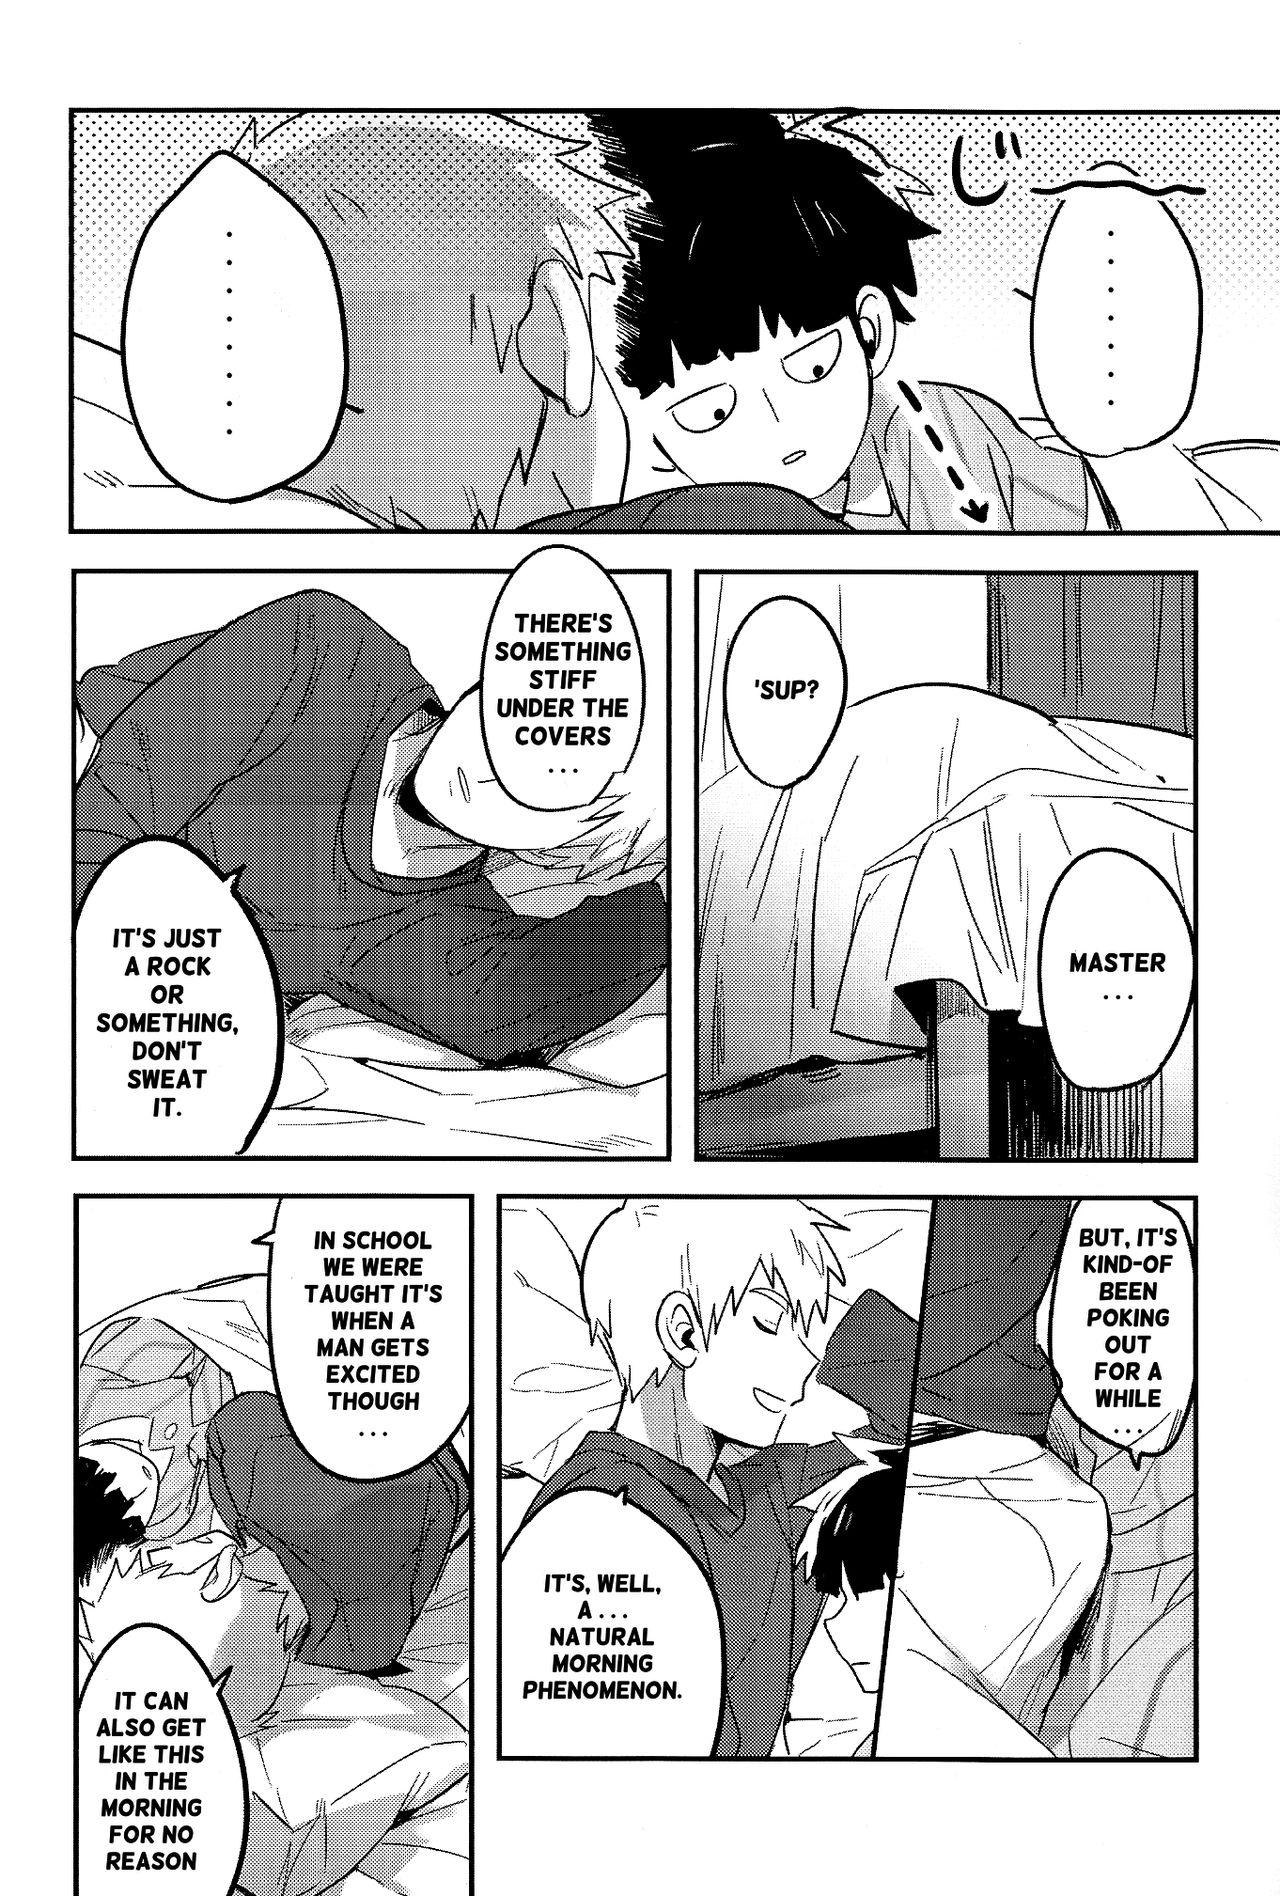 Candid Moment Ring - Mob psycho 100 Best - Page 12